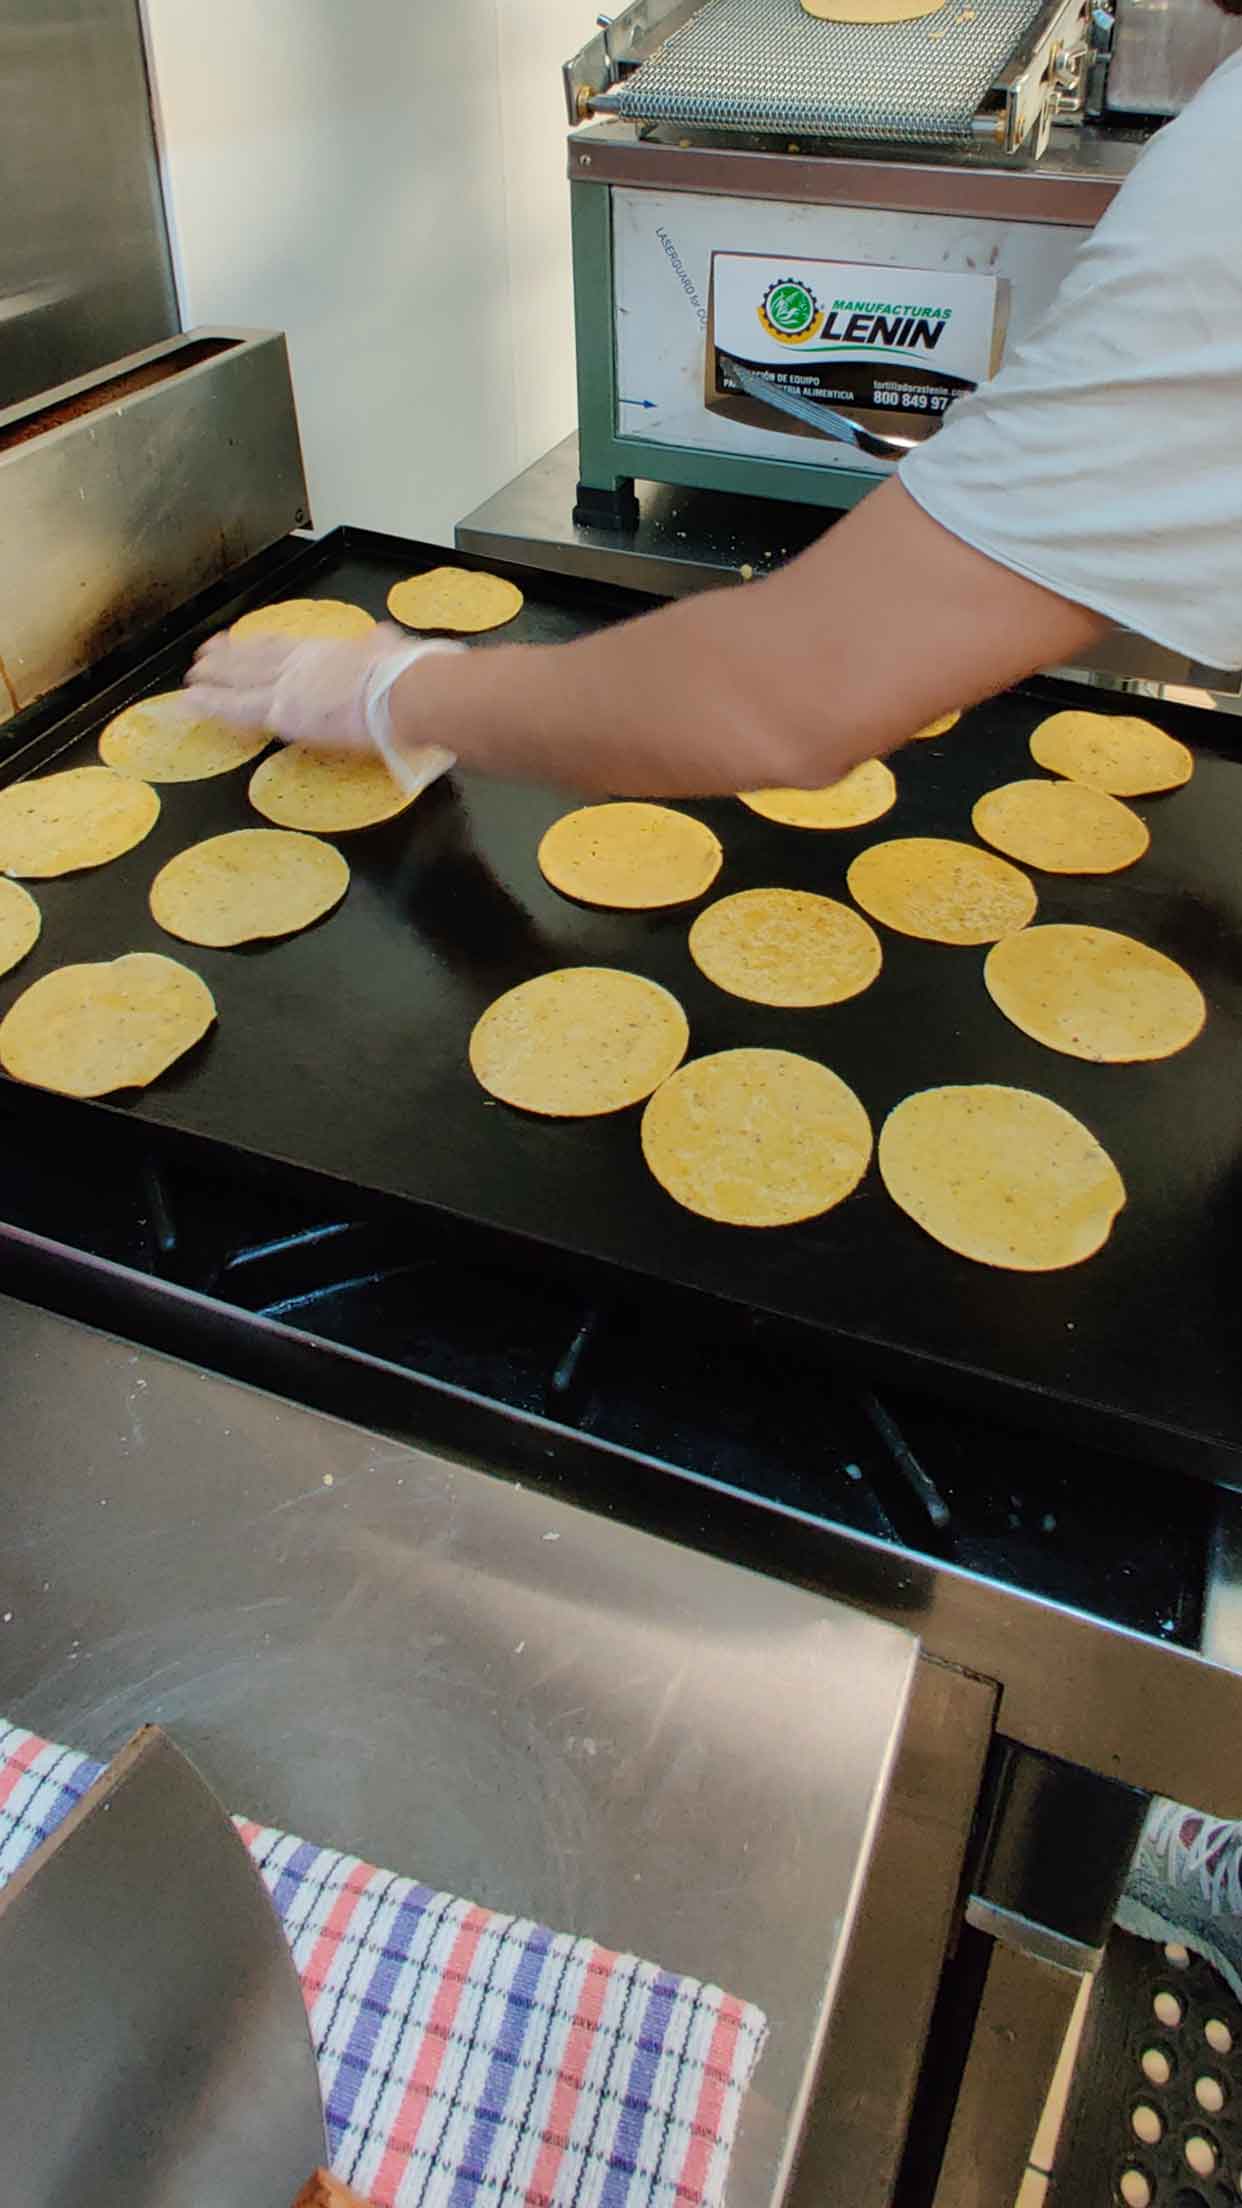 Corn tortillas are being baked on the spot